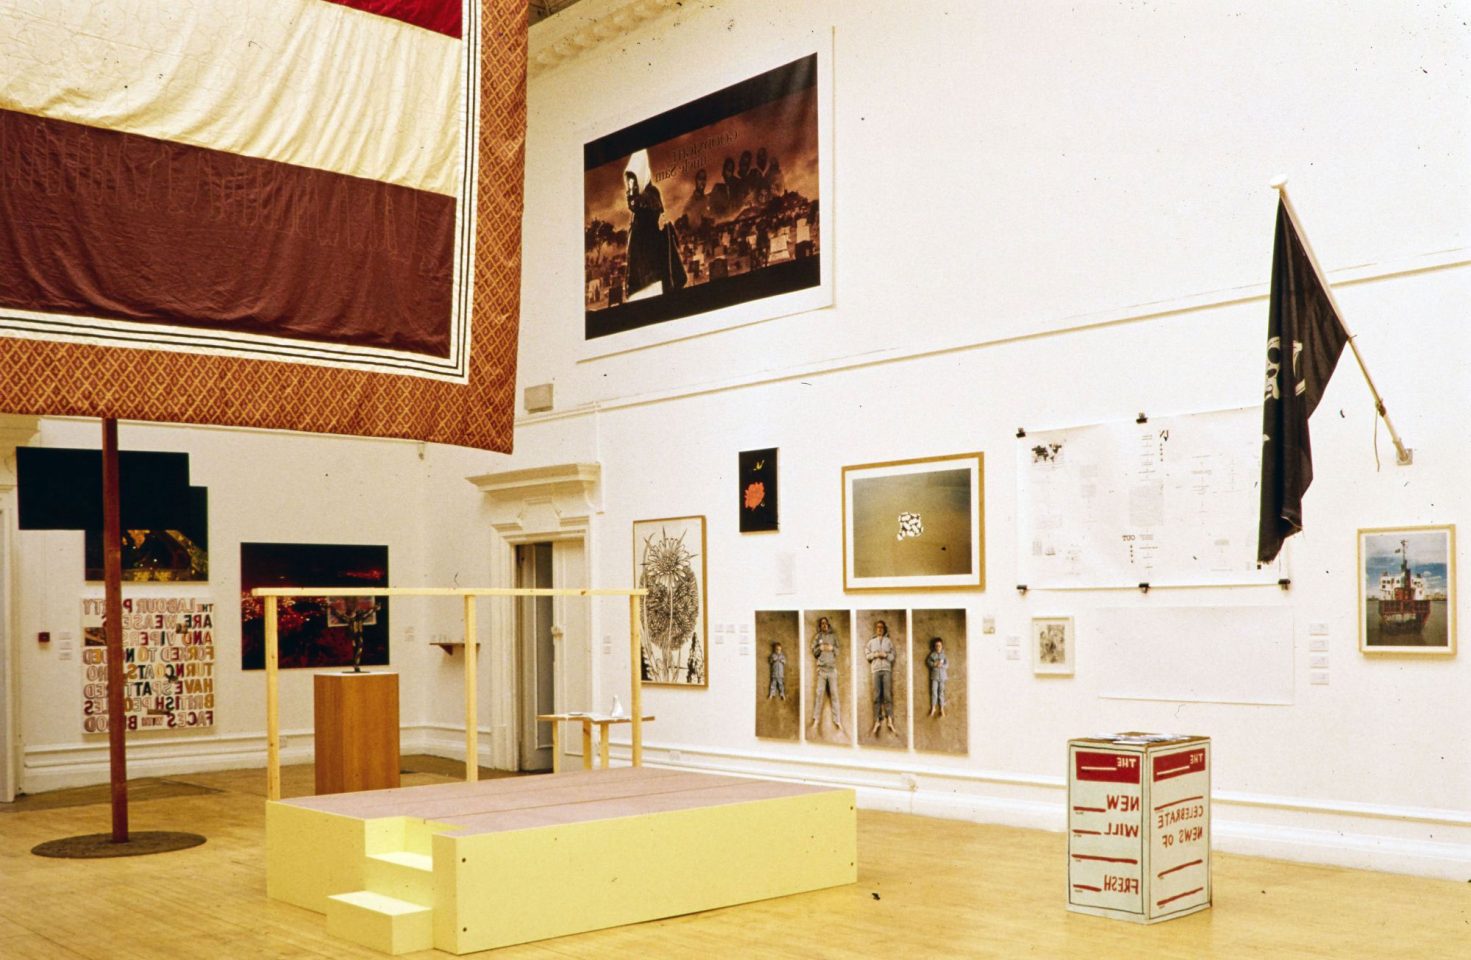 Installation view from the 2003 group show Independence.
